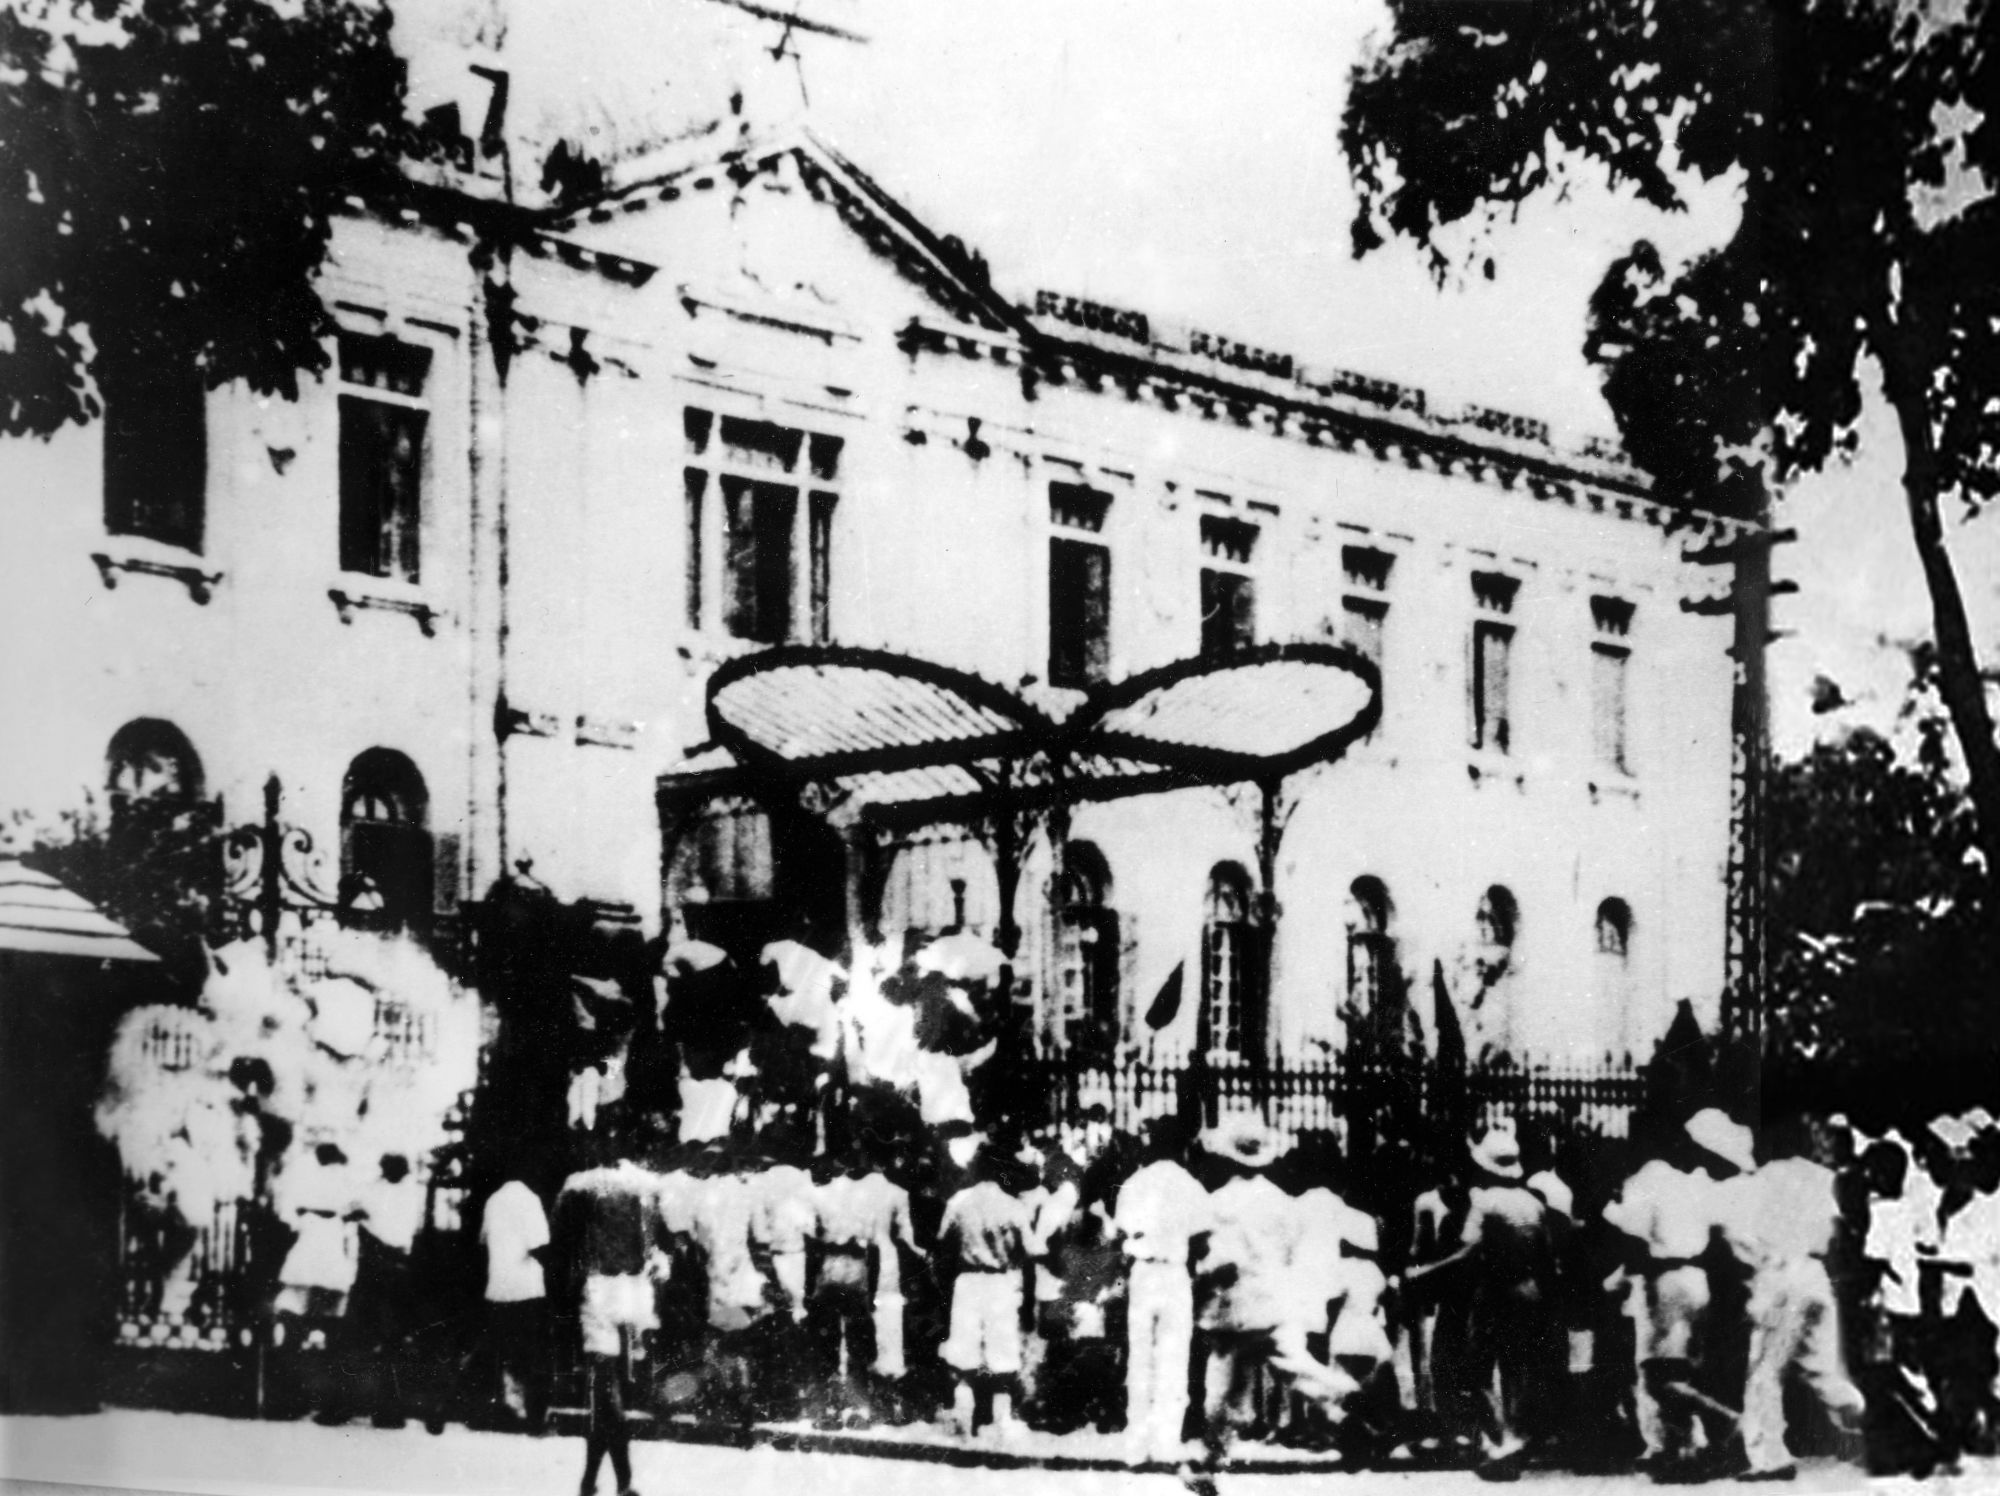 On August 19, 1945, following a meeting at the Opera House Square, Hanoians gained the Tonkin Palace – headquarters of the French-backed administration in the North. The victory of the August Revolution opened up a new era in Vietnam, with Vietnamese people owning the country and mastering their own destiny.(Photo: VNA)